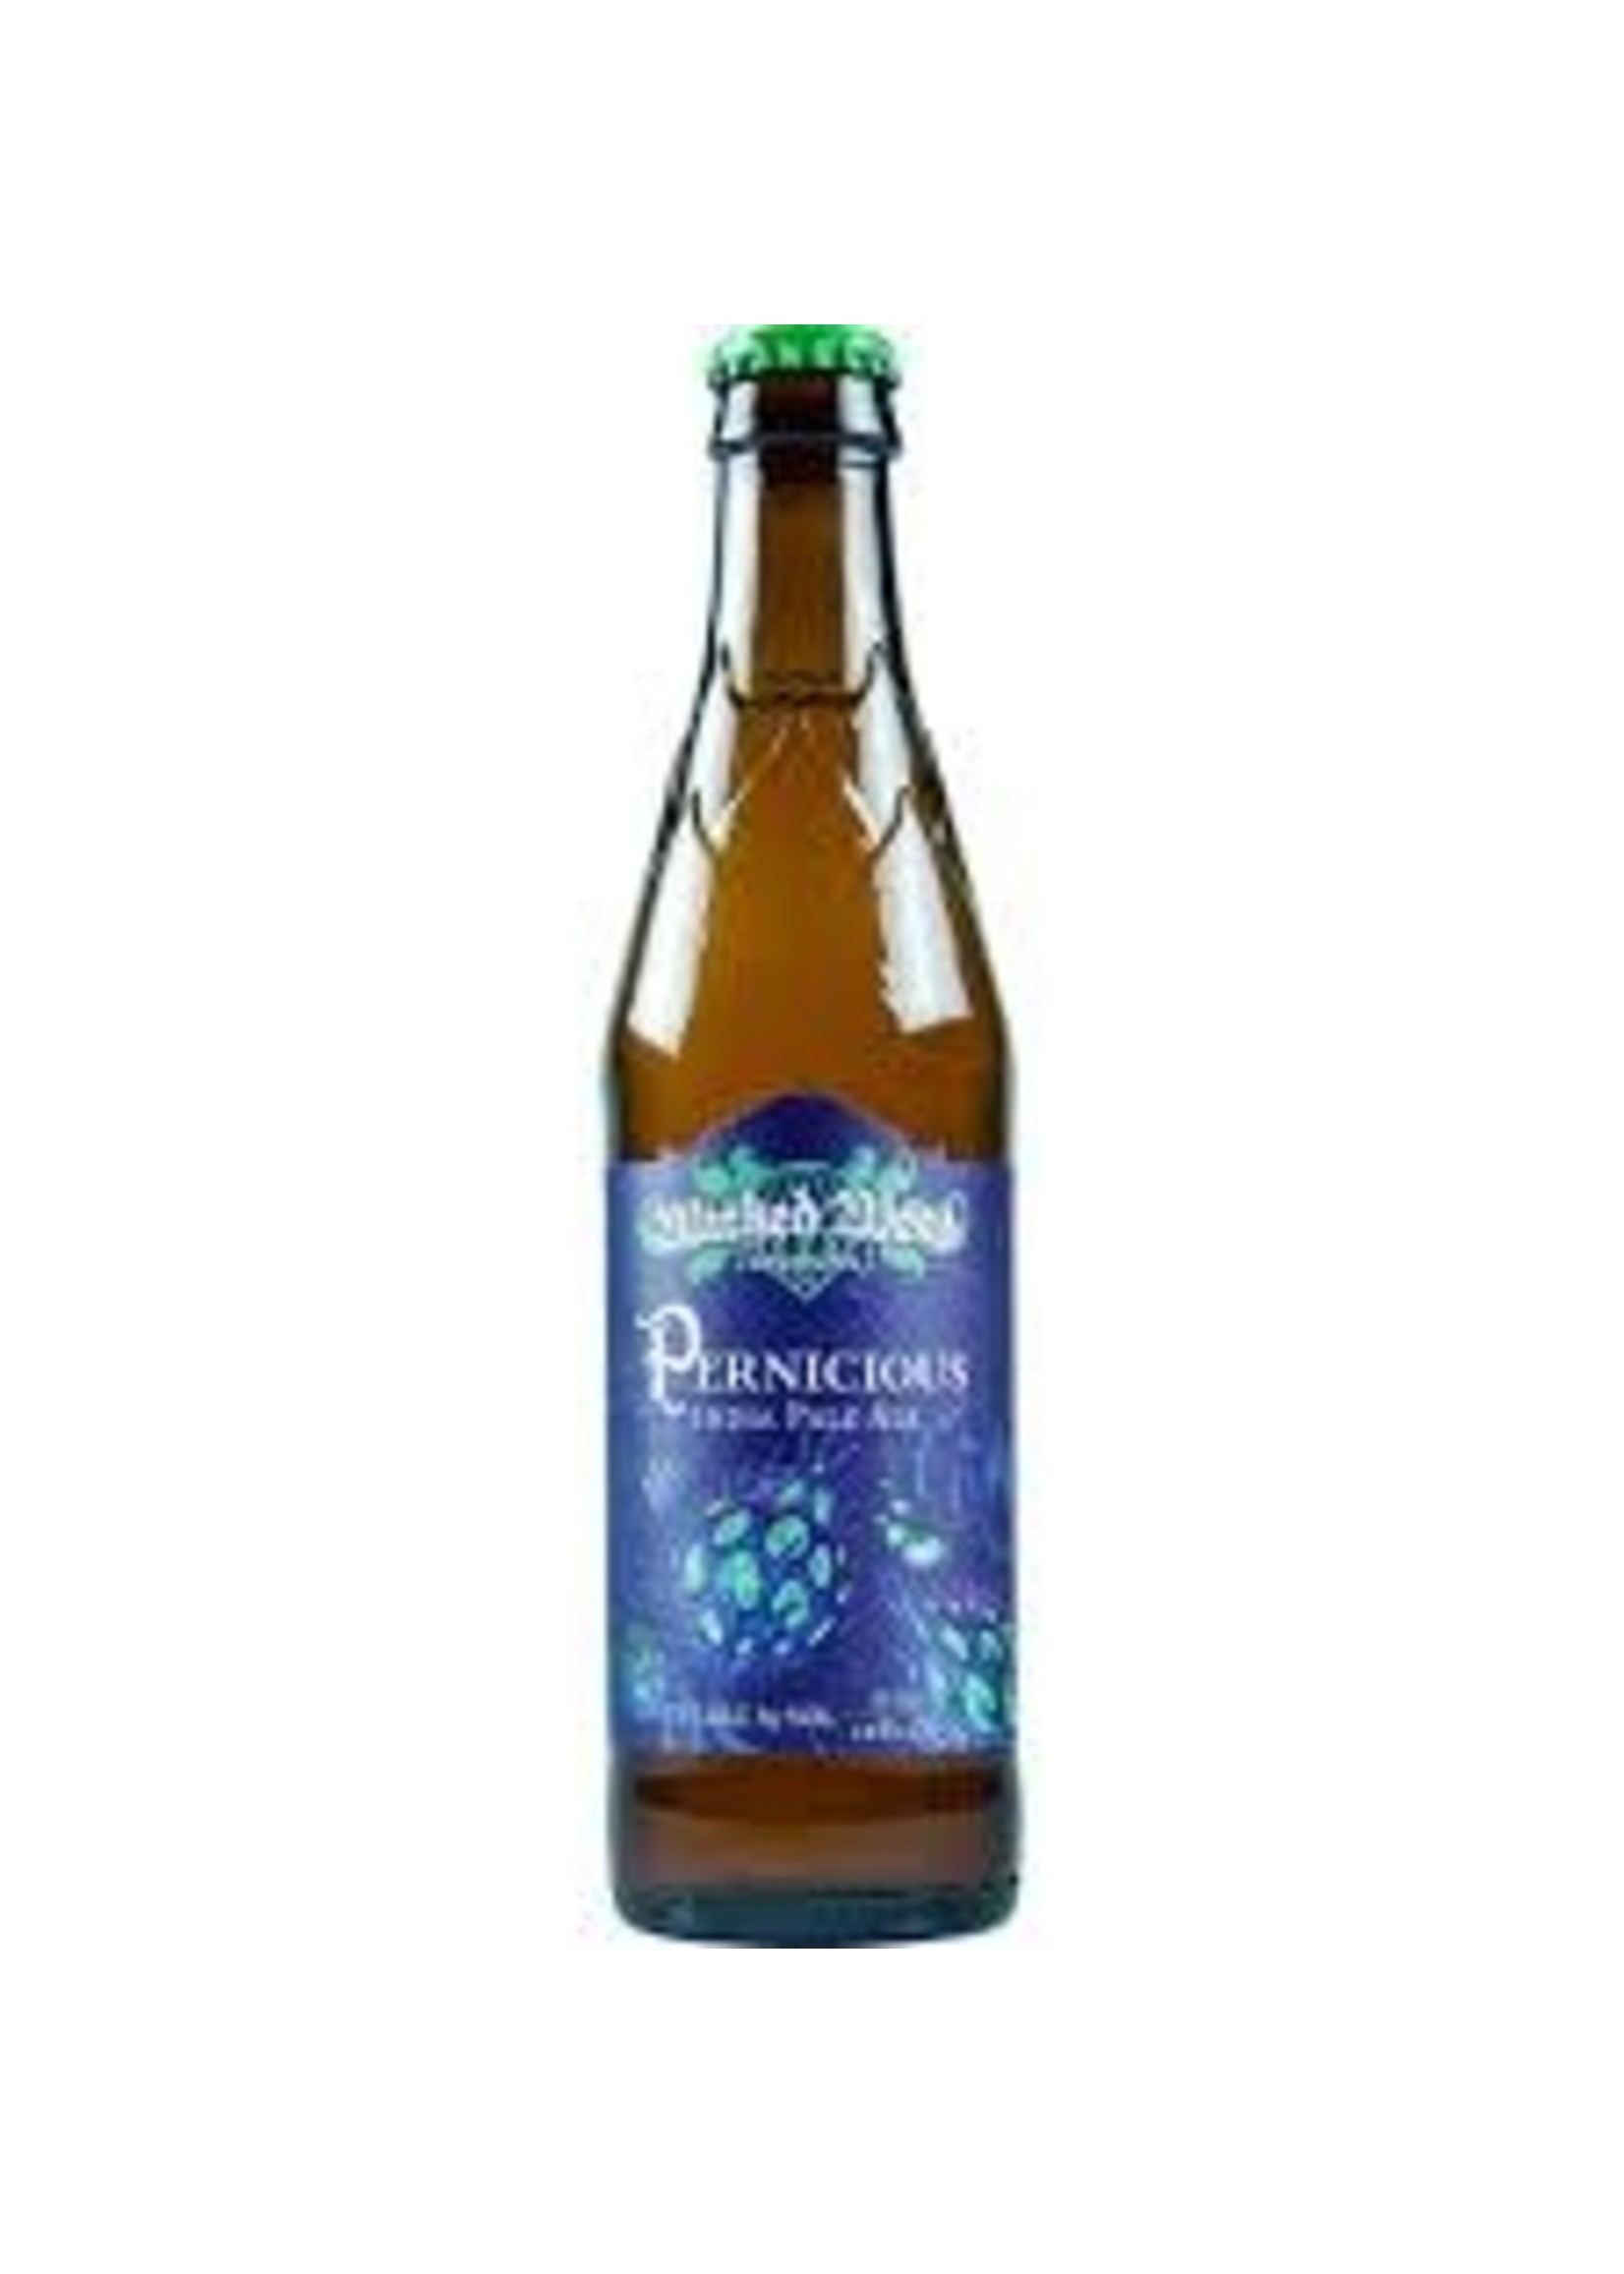 WICKED WEED BREWING WICKED WEED BREWING	PERNICIOUS	12 OZ